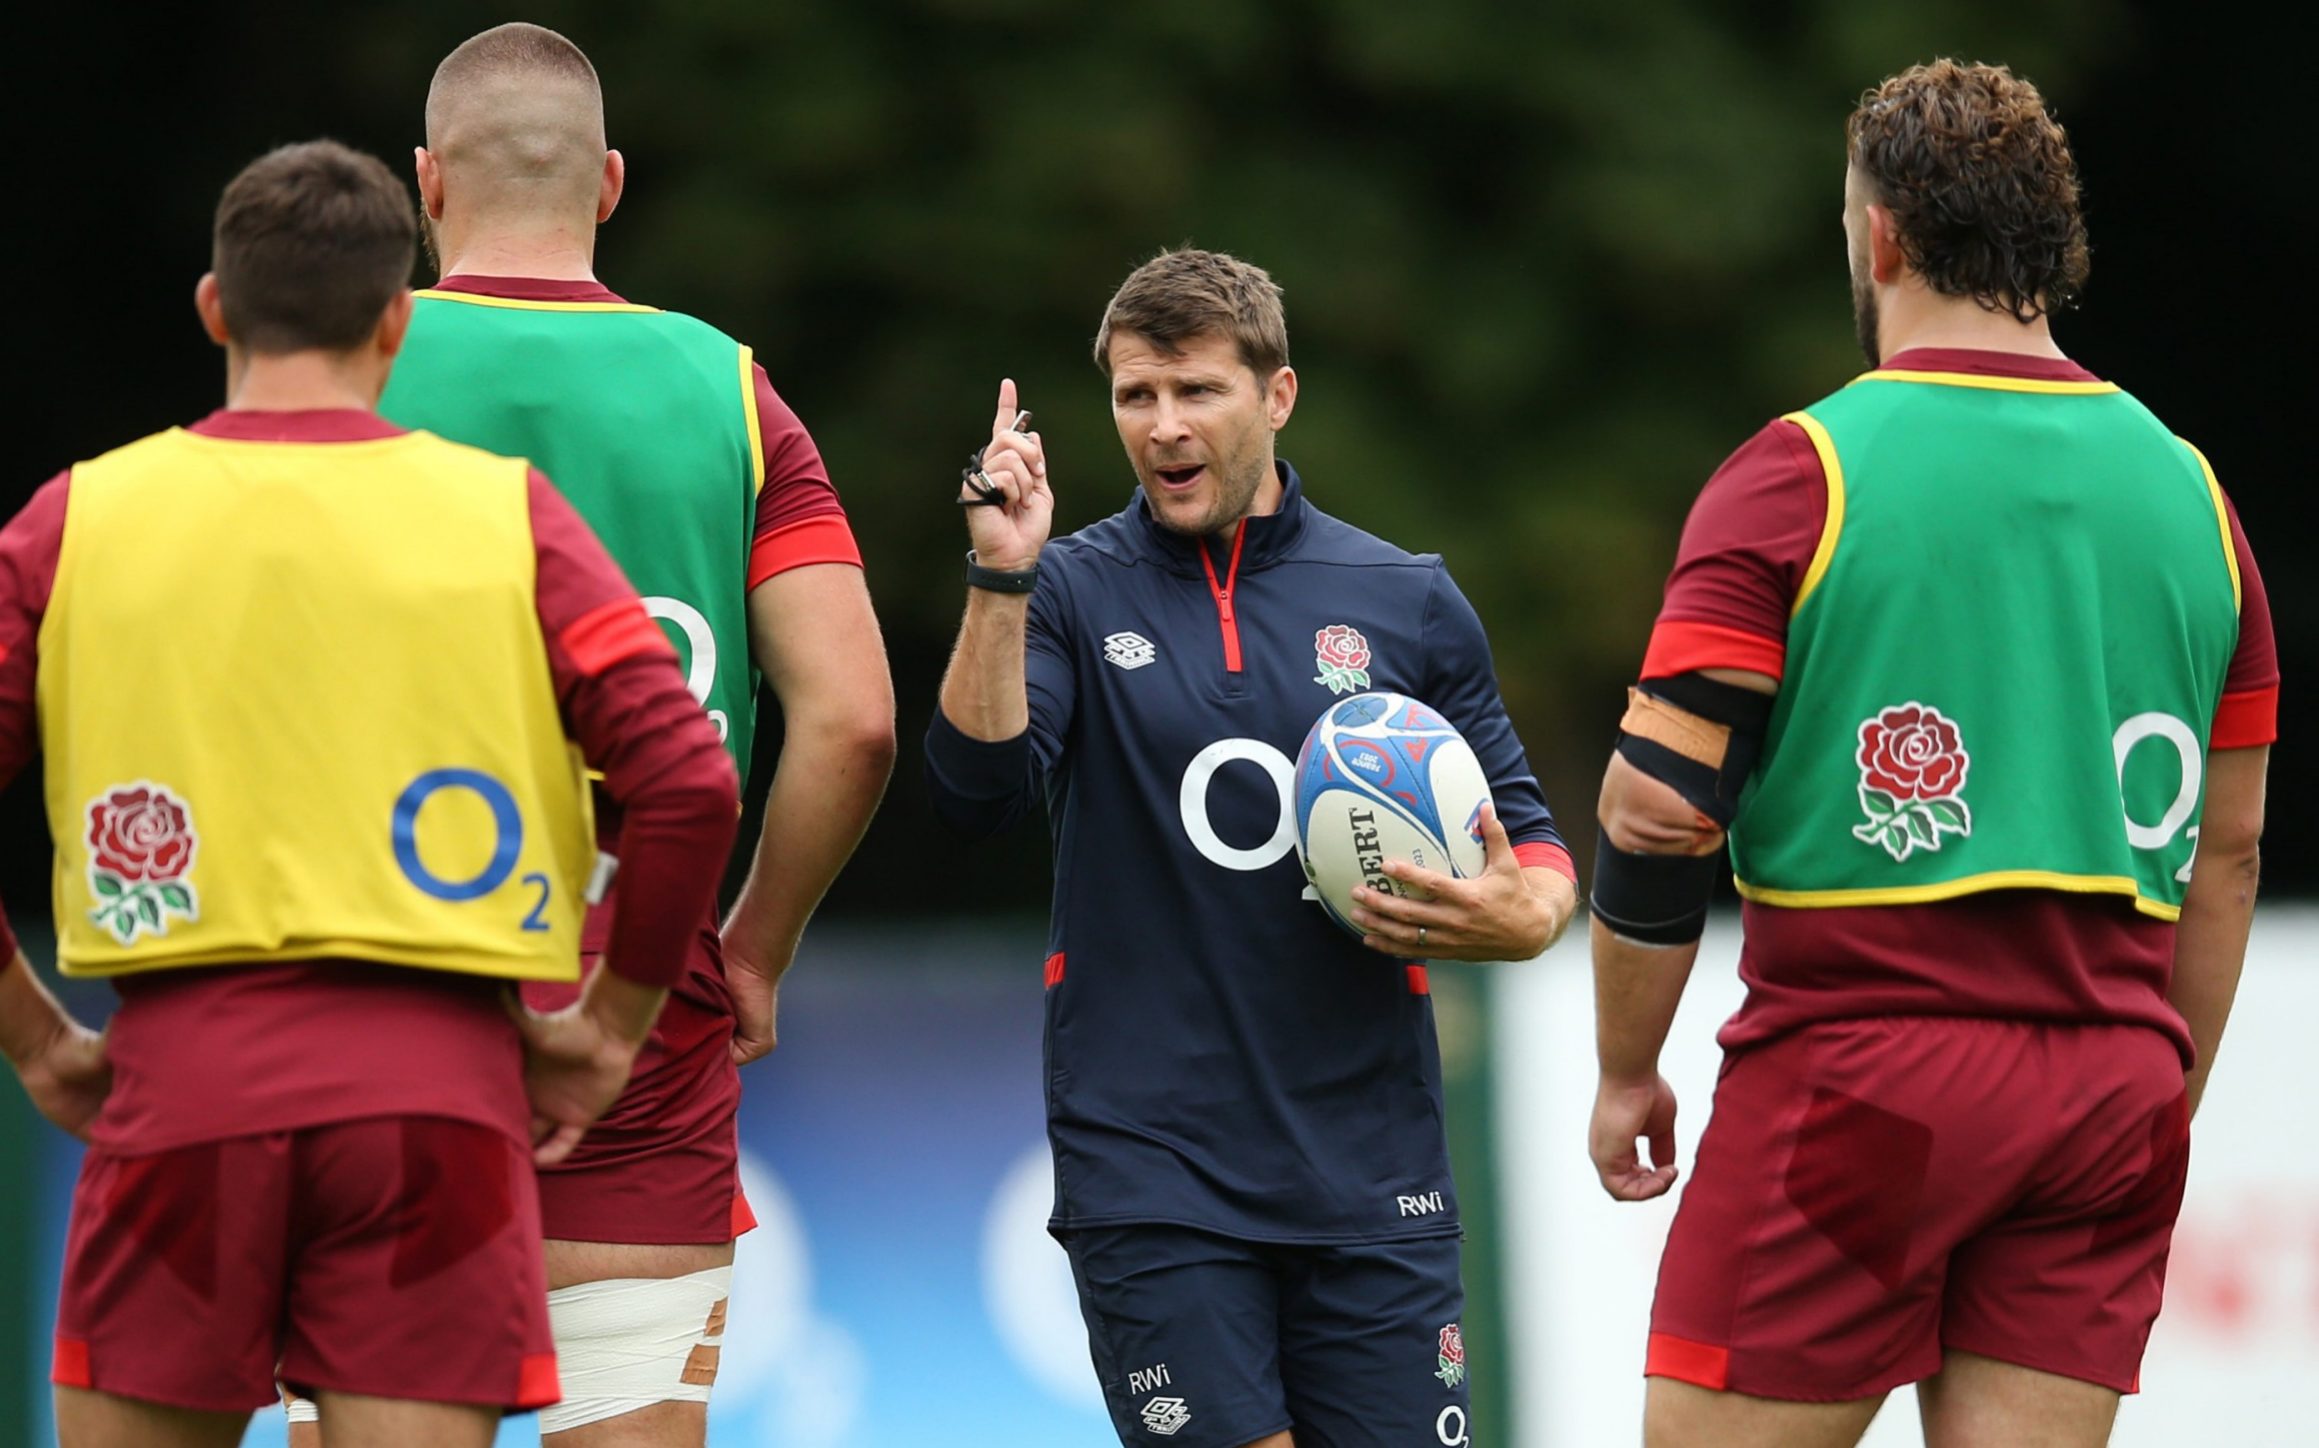 steve borthwick will not be on andy farrell’s lions staff – but other england coaches can be